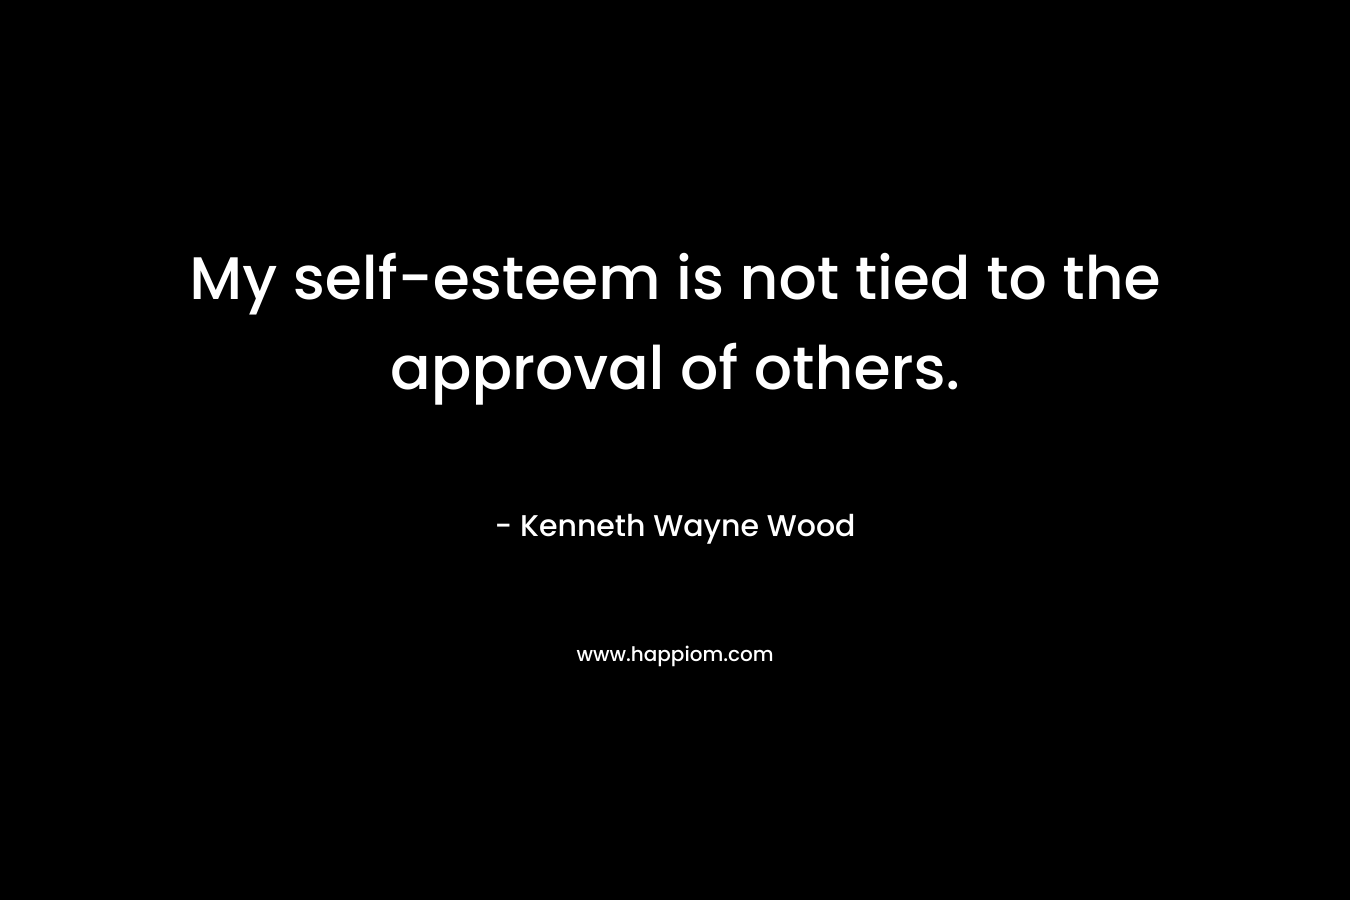 My self-esteem is not tied to the approval of others.